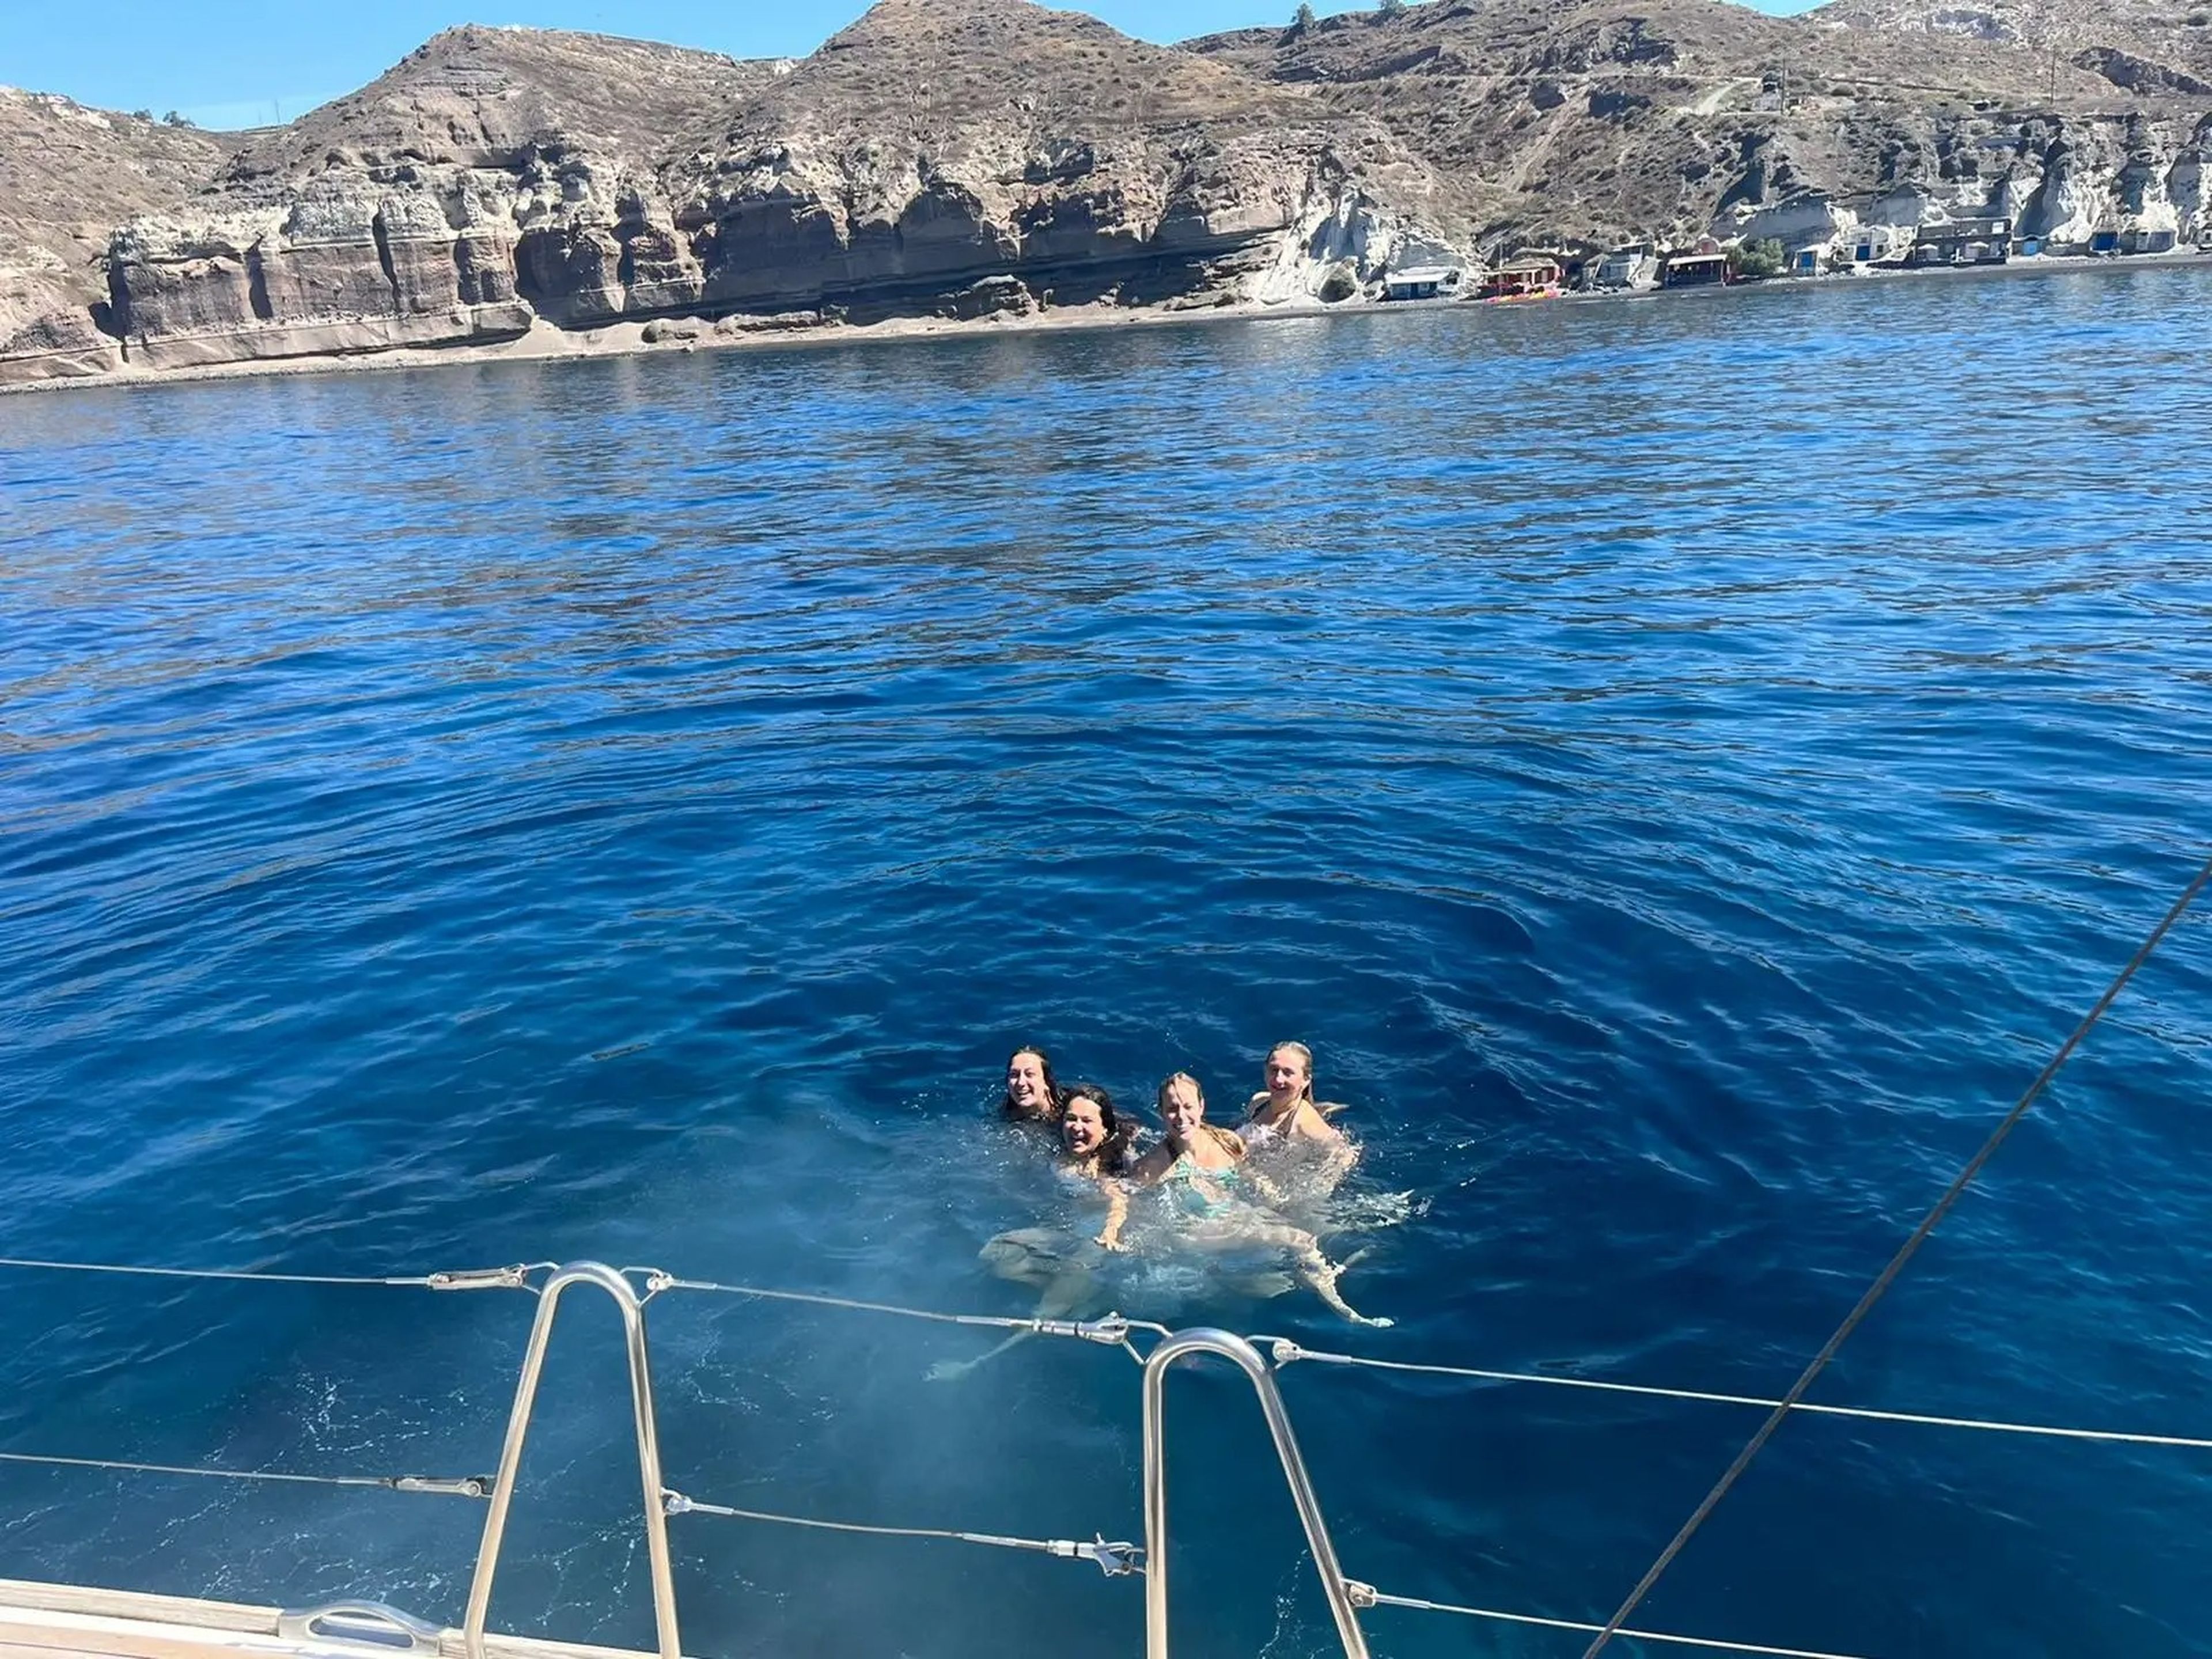 jordana and her friends swimming in the ocean in greece